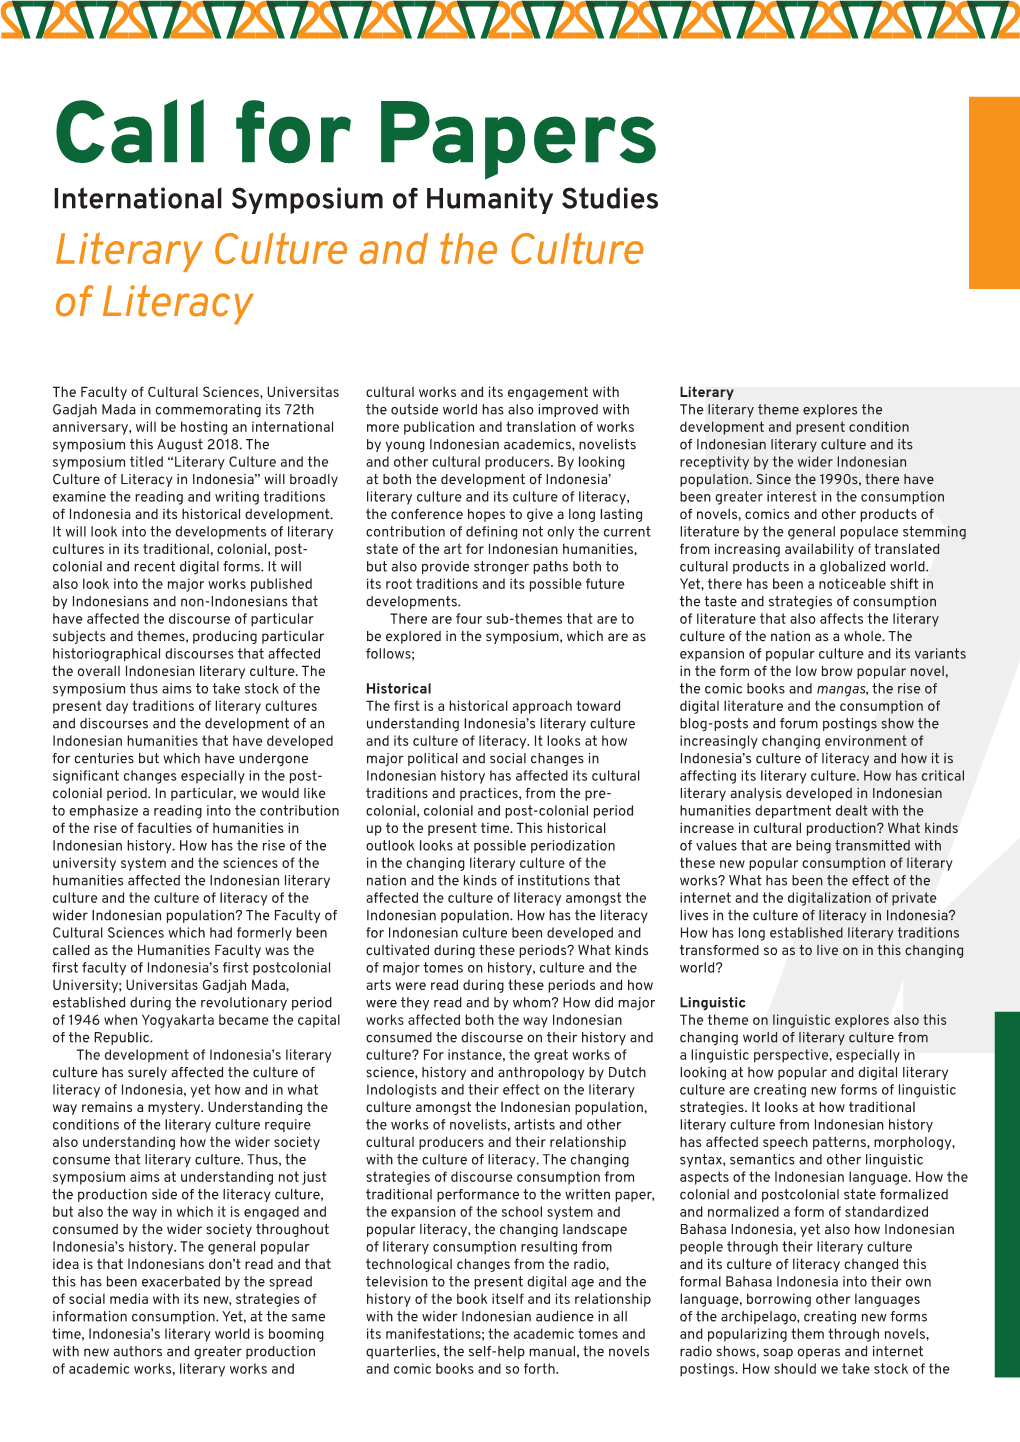 Literary Culture and the Culture of Literacy